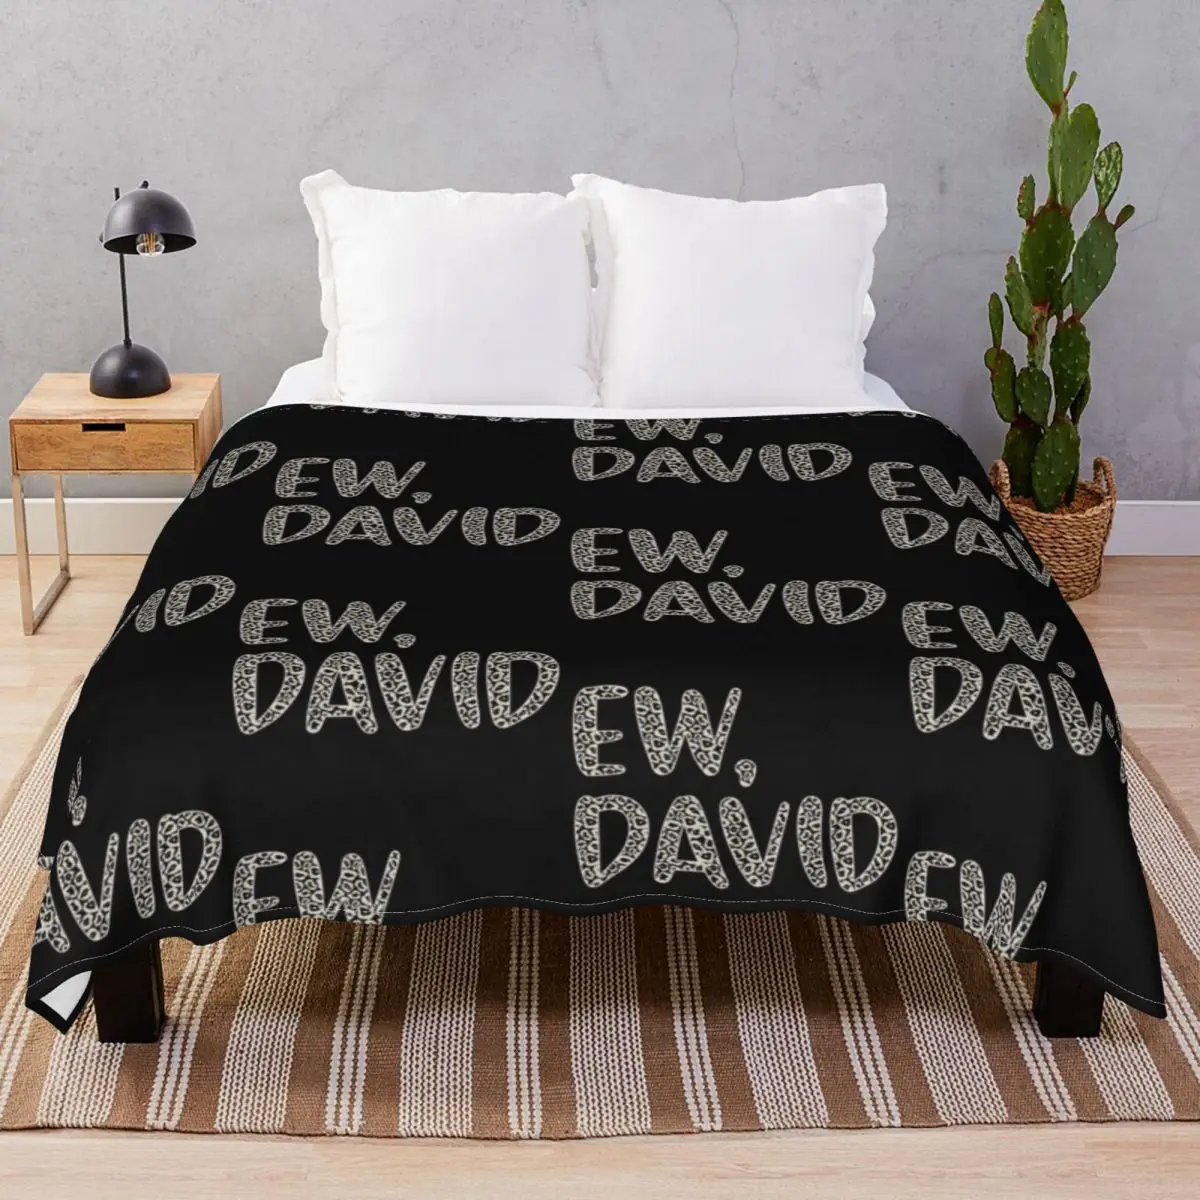 Ew David Print Blankets Flannel Spring/Autumn Portable Throw Blanket for Bedding Home Couch Travel Cinema